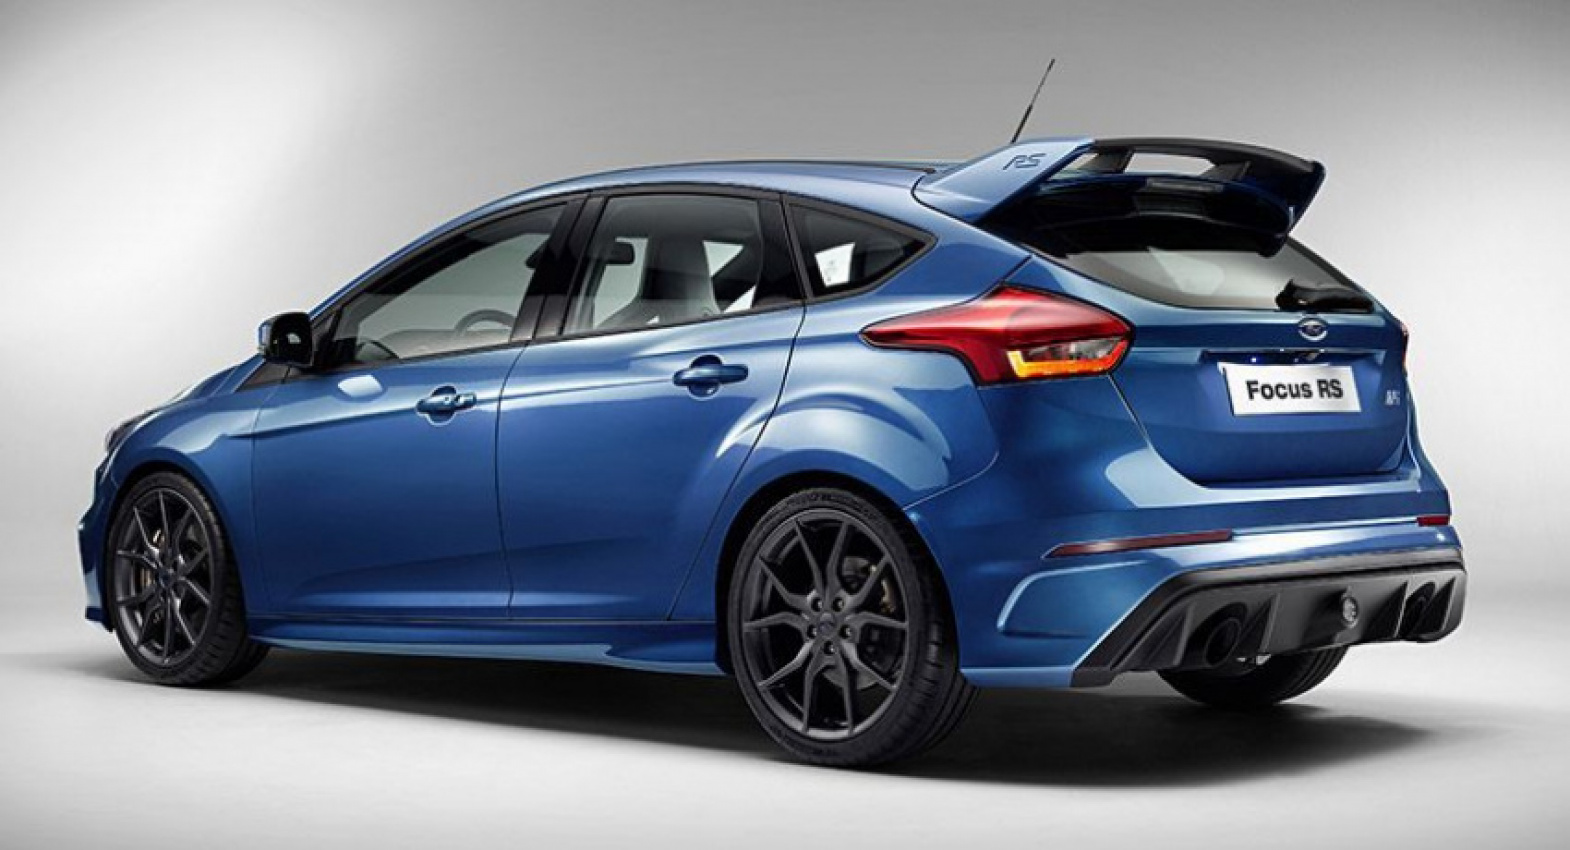 autos, cars, ford, all-new ford focus rs, auto news, ford focus, ford focus rs, all-new ford focus rs performance figures revealed: 0-100 km/h in 4.7 seconds, 266 km/h top speed